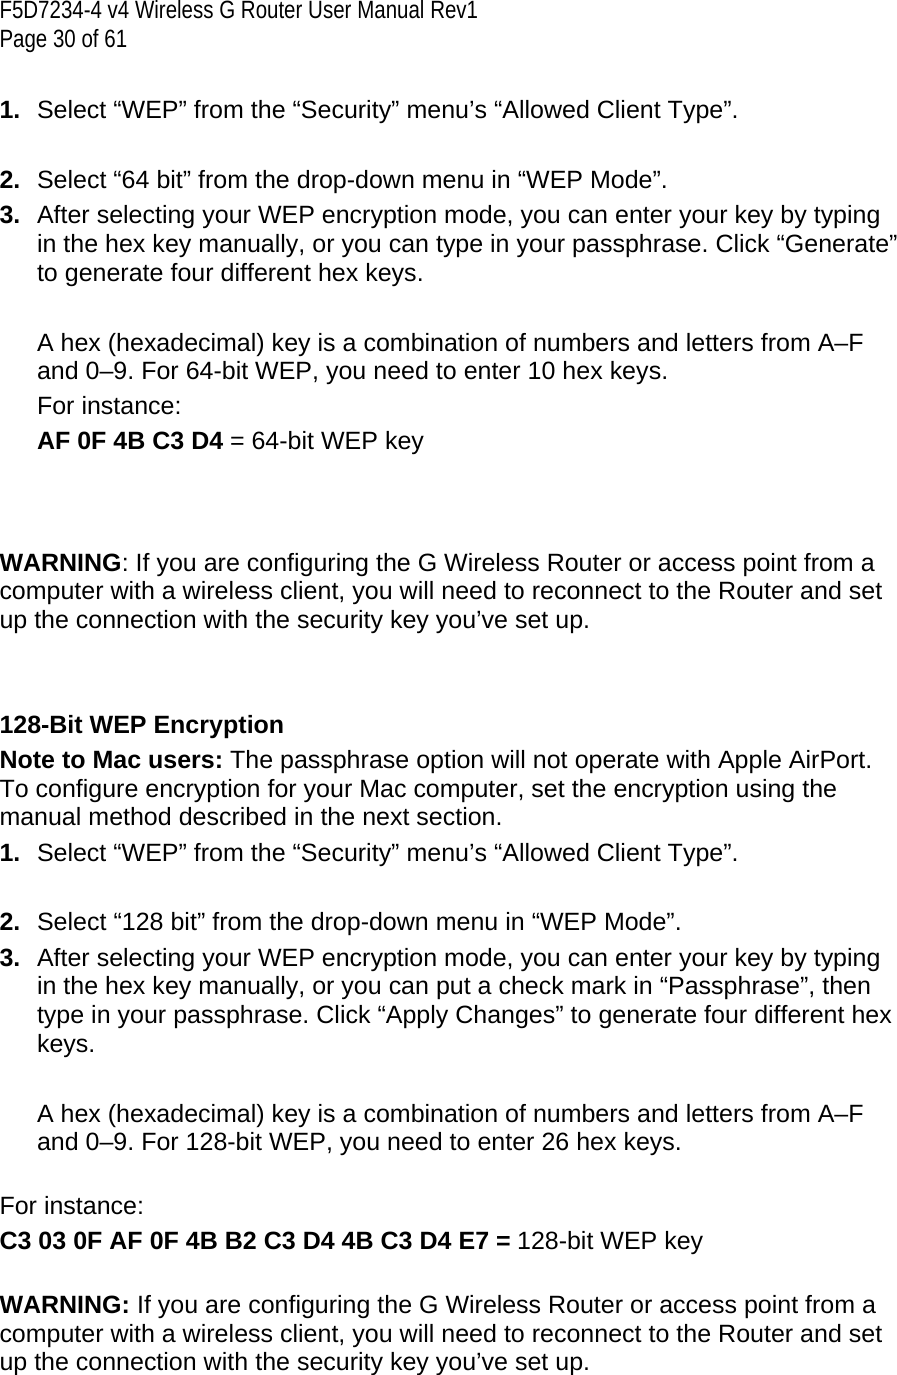 F5D7234-4 v4 Wireless G Router User Manual Rev1  Page 30 of 61   1.  Select “WEP” from the “Security” menu’s “Allowed Client Type”.  2.  Select “64 bit” from the drop-down menu in “WEP Mode”. 3.  After selecting your WEP encryption mode, you can enter your key by typing in the hex key manually, or you can type in your passphrase. Click “Generate” to generate four different hex keys.    A hex (hexadecimal) key is a combination of numbers and letters from A–F and 0–9. For 64-bit WEP, you need to enter 10 hex keys.  For instance:  AF 0F 4B C3 D4 = 64-bit WEP key    WARNING: If you are configuring the G Wireless Router or access point from a computer with a wireless client, you will need to reconnect to the Router and set up the connection with the security key you’ve set up.   128-Bit WEP Encryption Note to Mac users: The passphrase option will not operate with Apple AirPort. To configure encryption for your Mac computer, set the encryption using the manual method described in the next section. 1.  Select “WEP” from the “Security” menu’s “Allowed Client Type”.  2.  Select “128 bit” from the drop-down menu in “WEP Mode”. 3.  After selecting your WEP encryption mode, you can enter your key by typing in the hex key manually, or you can put a check mark in “Passphrase”, then type in your passphrase. Click “Apply Changes” to generate four different hex keys.    A hex (hexadecimal) key is a combination of numbers and letters from A–F and 0–9. For 128-bit WEP, you need to enter 26 hex keys.   For instance: C3 03 0F AF 0F 4B B2 C3 D4 4B C3 D4 E7 = 128-bit WEP key  WARNING: If you are configuring the G Wireless Router or access point from a computer with a wireless client, you will need to reconnect to the Router and set up the connection with the security key you’ve set up. 